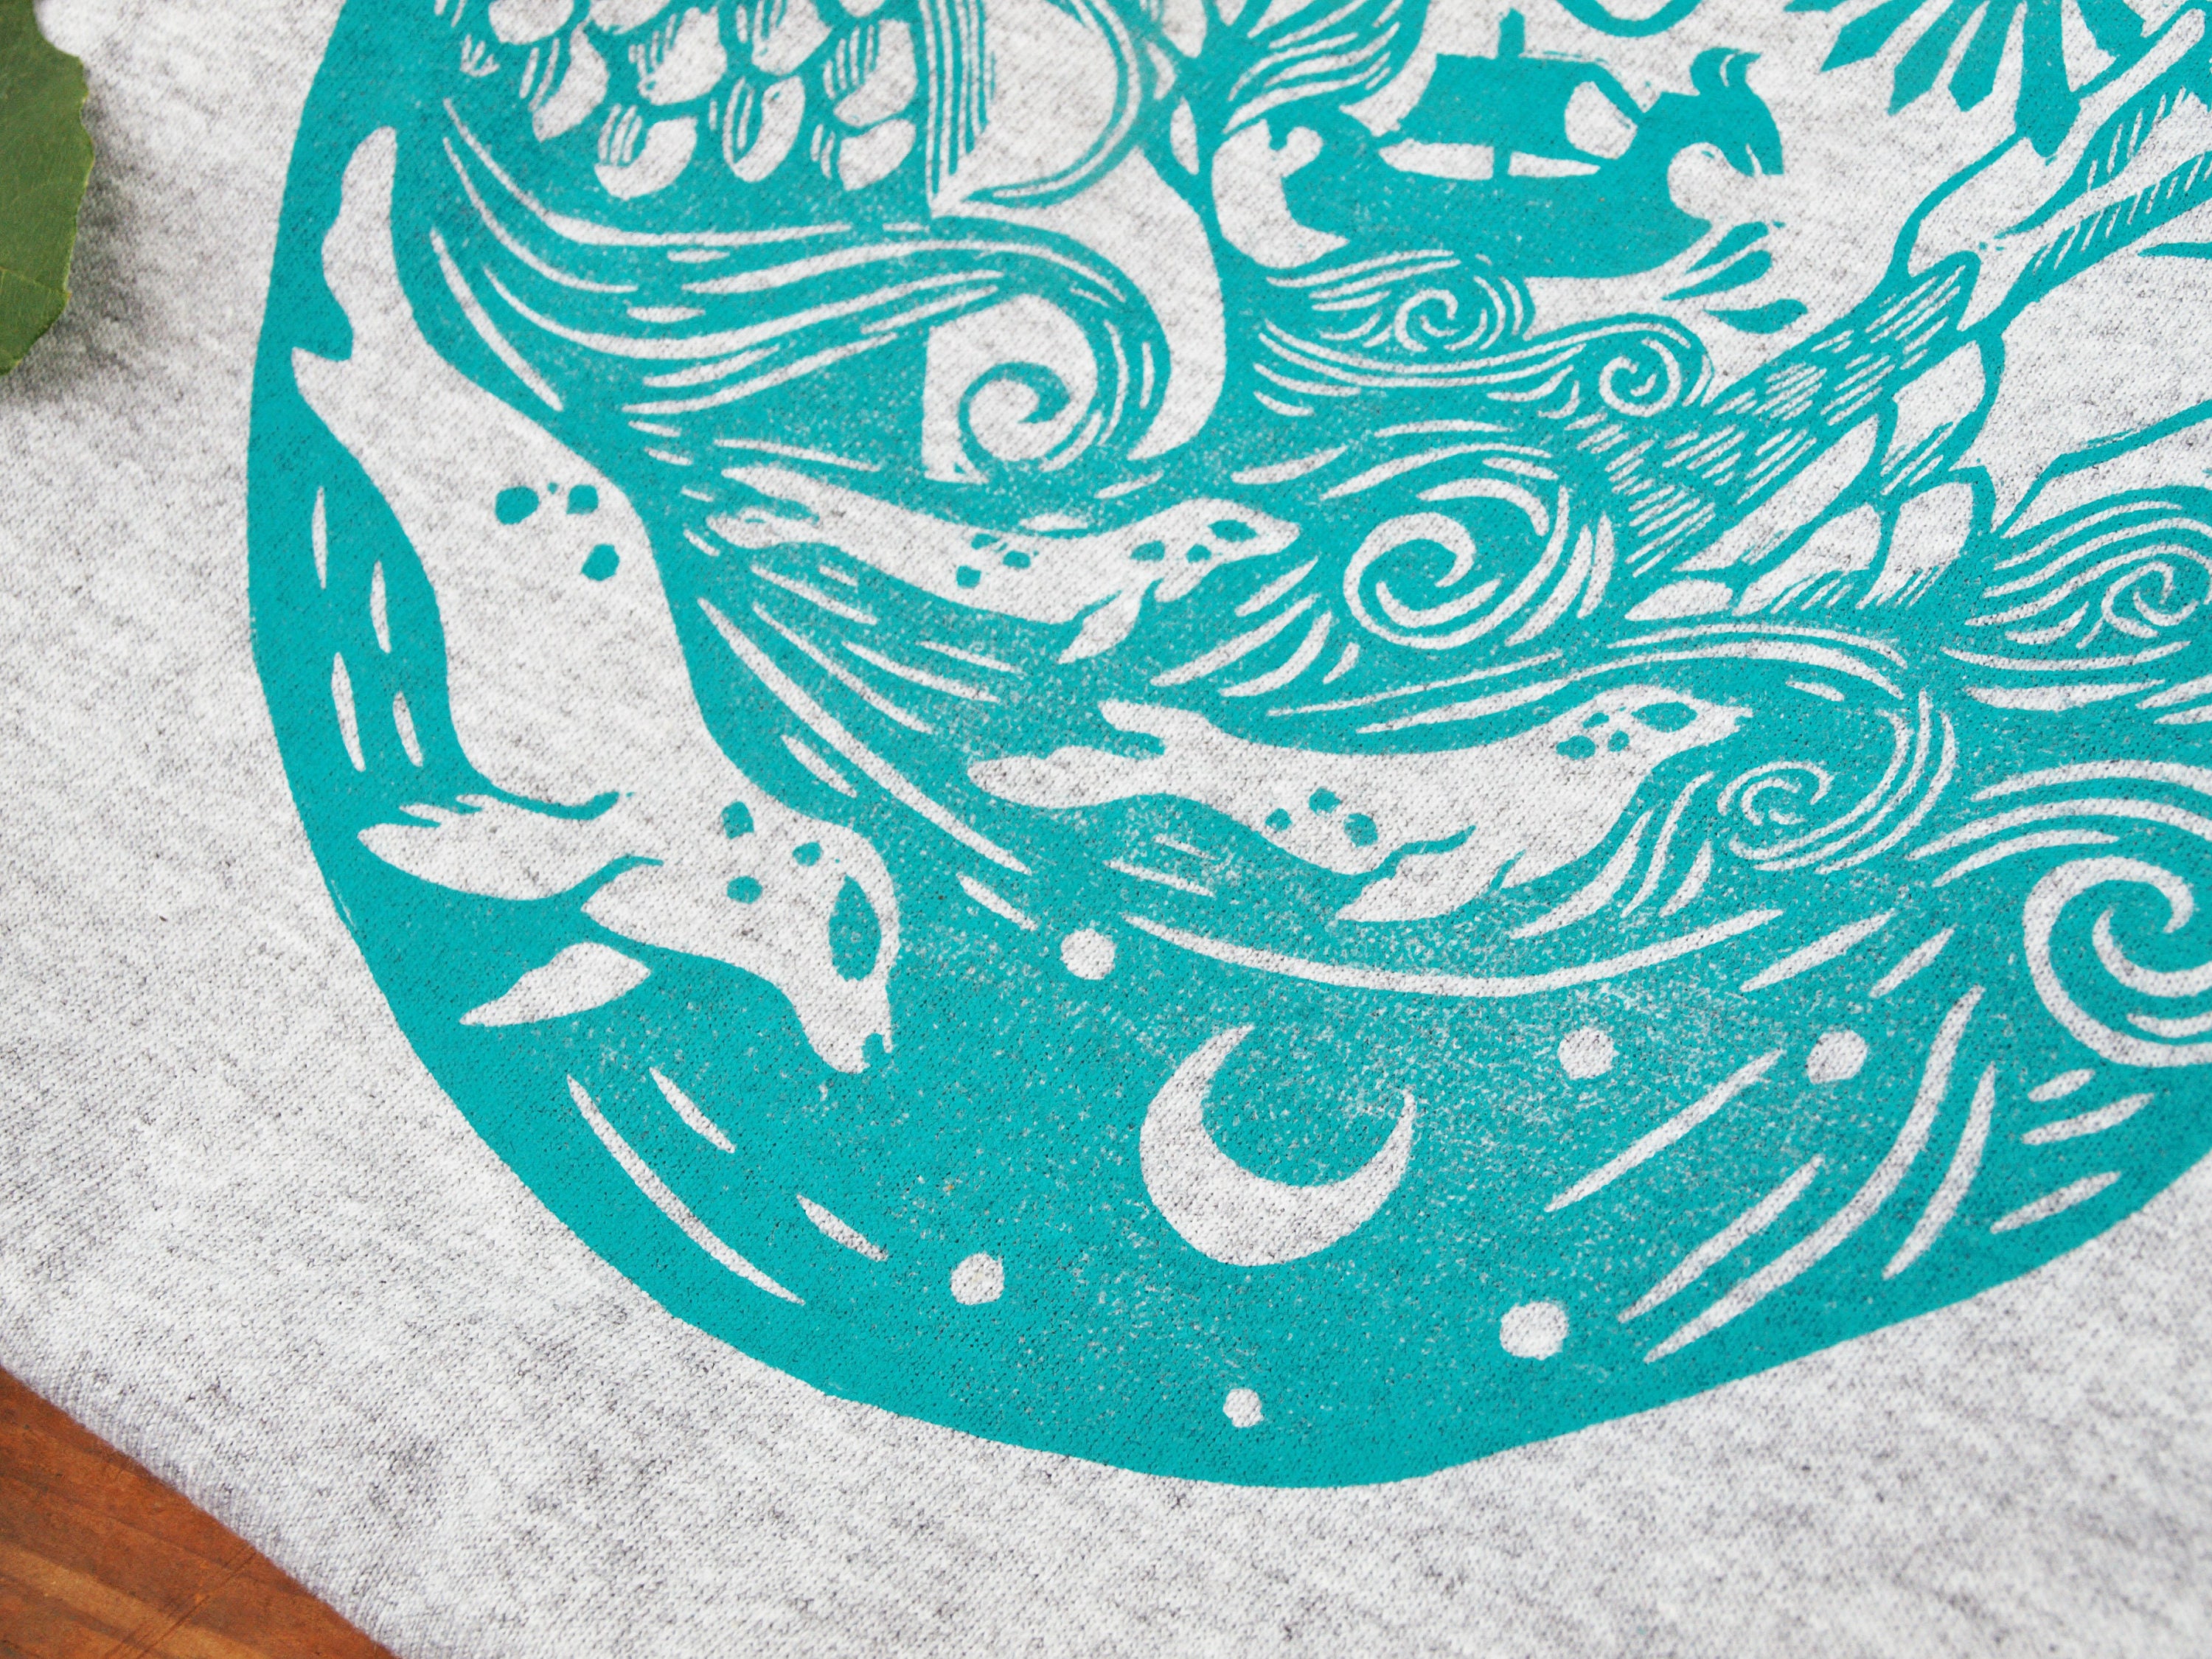 Sea Dreamer Linocut Block-printed Gray Heather and Turquoise | Etsy